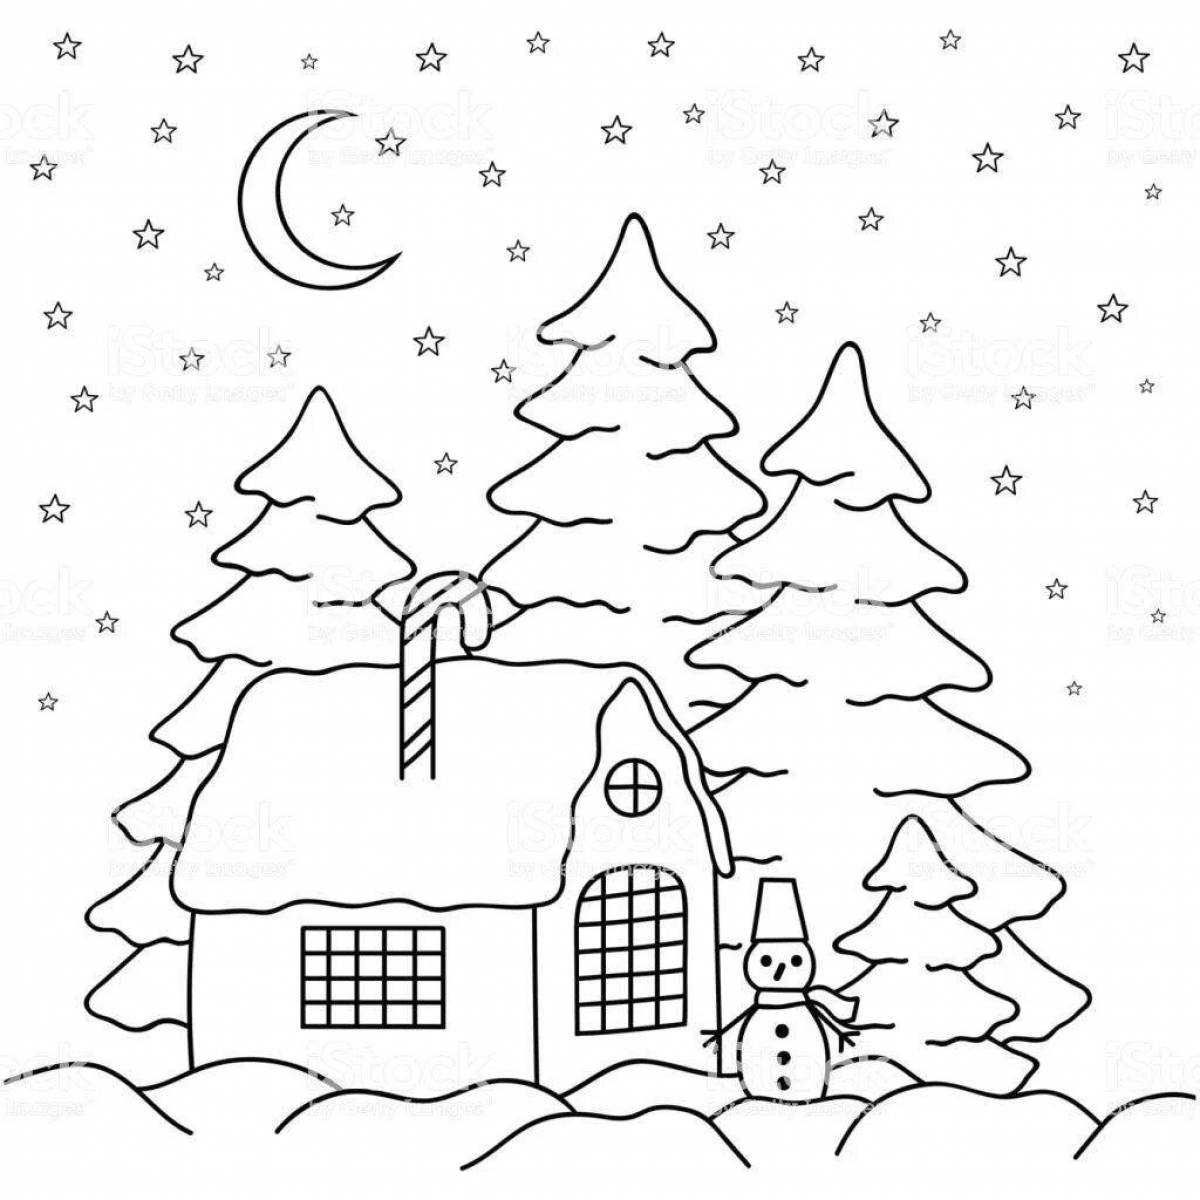 Colour coloring winter house for children